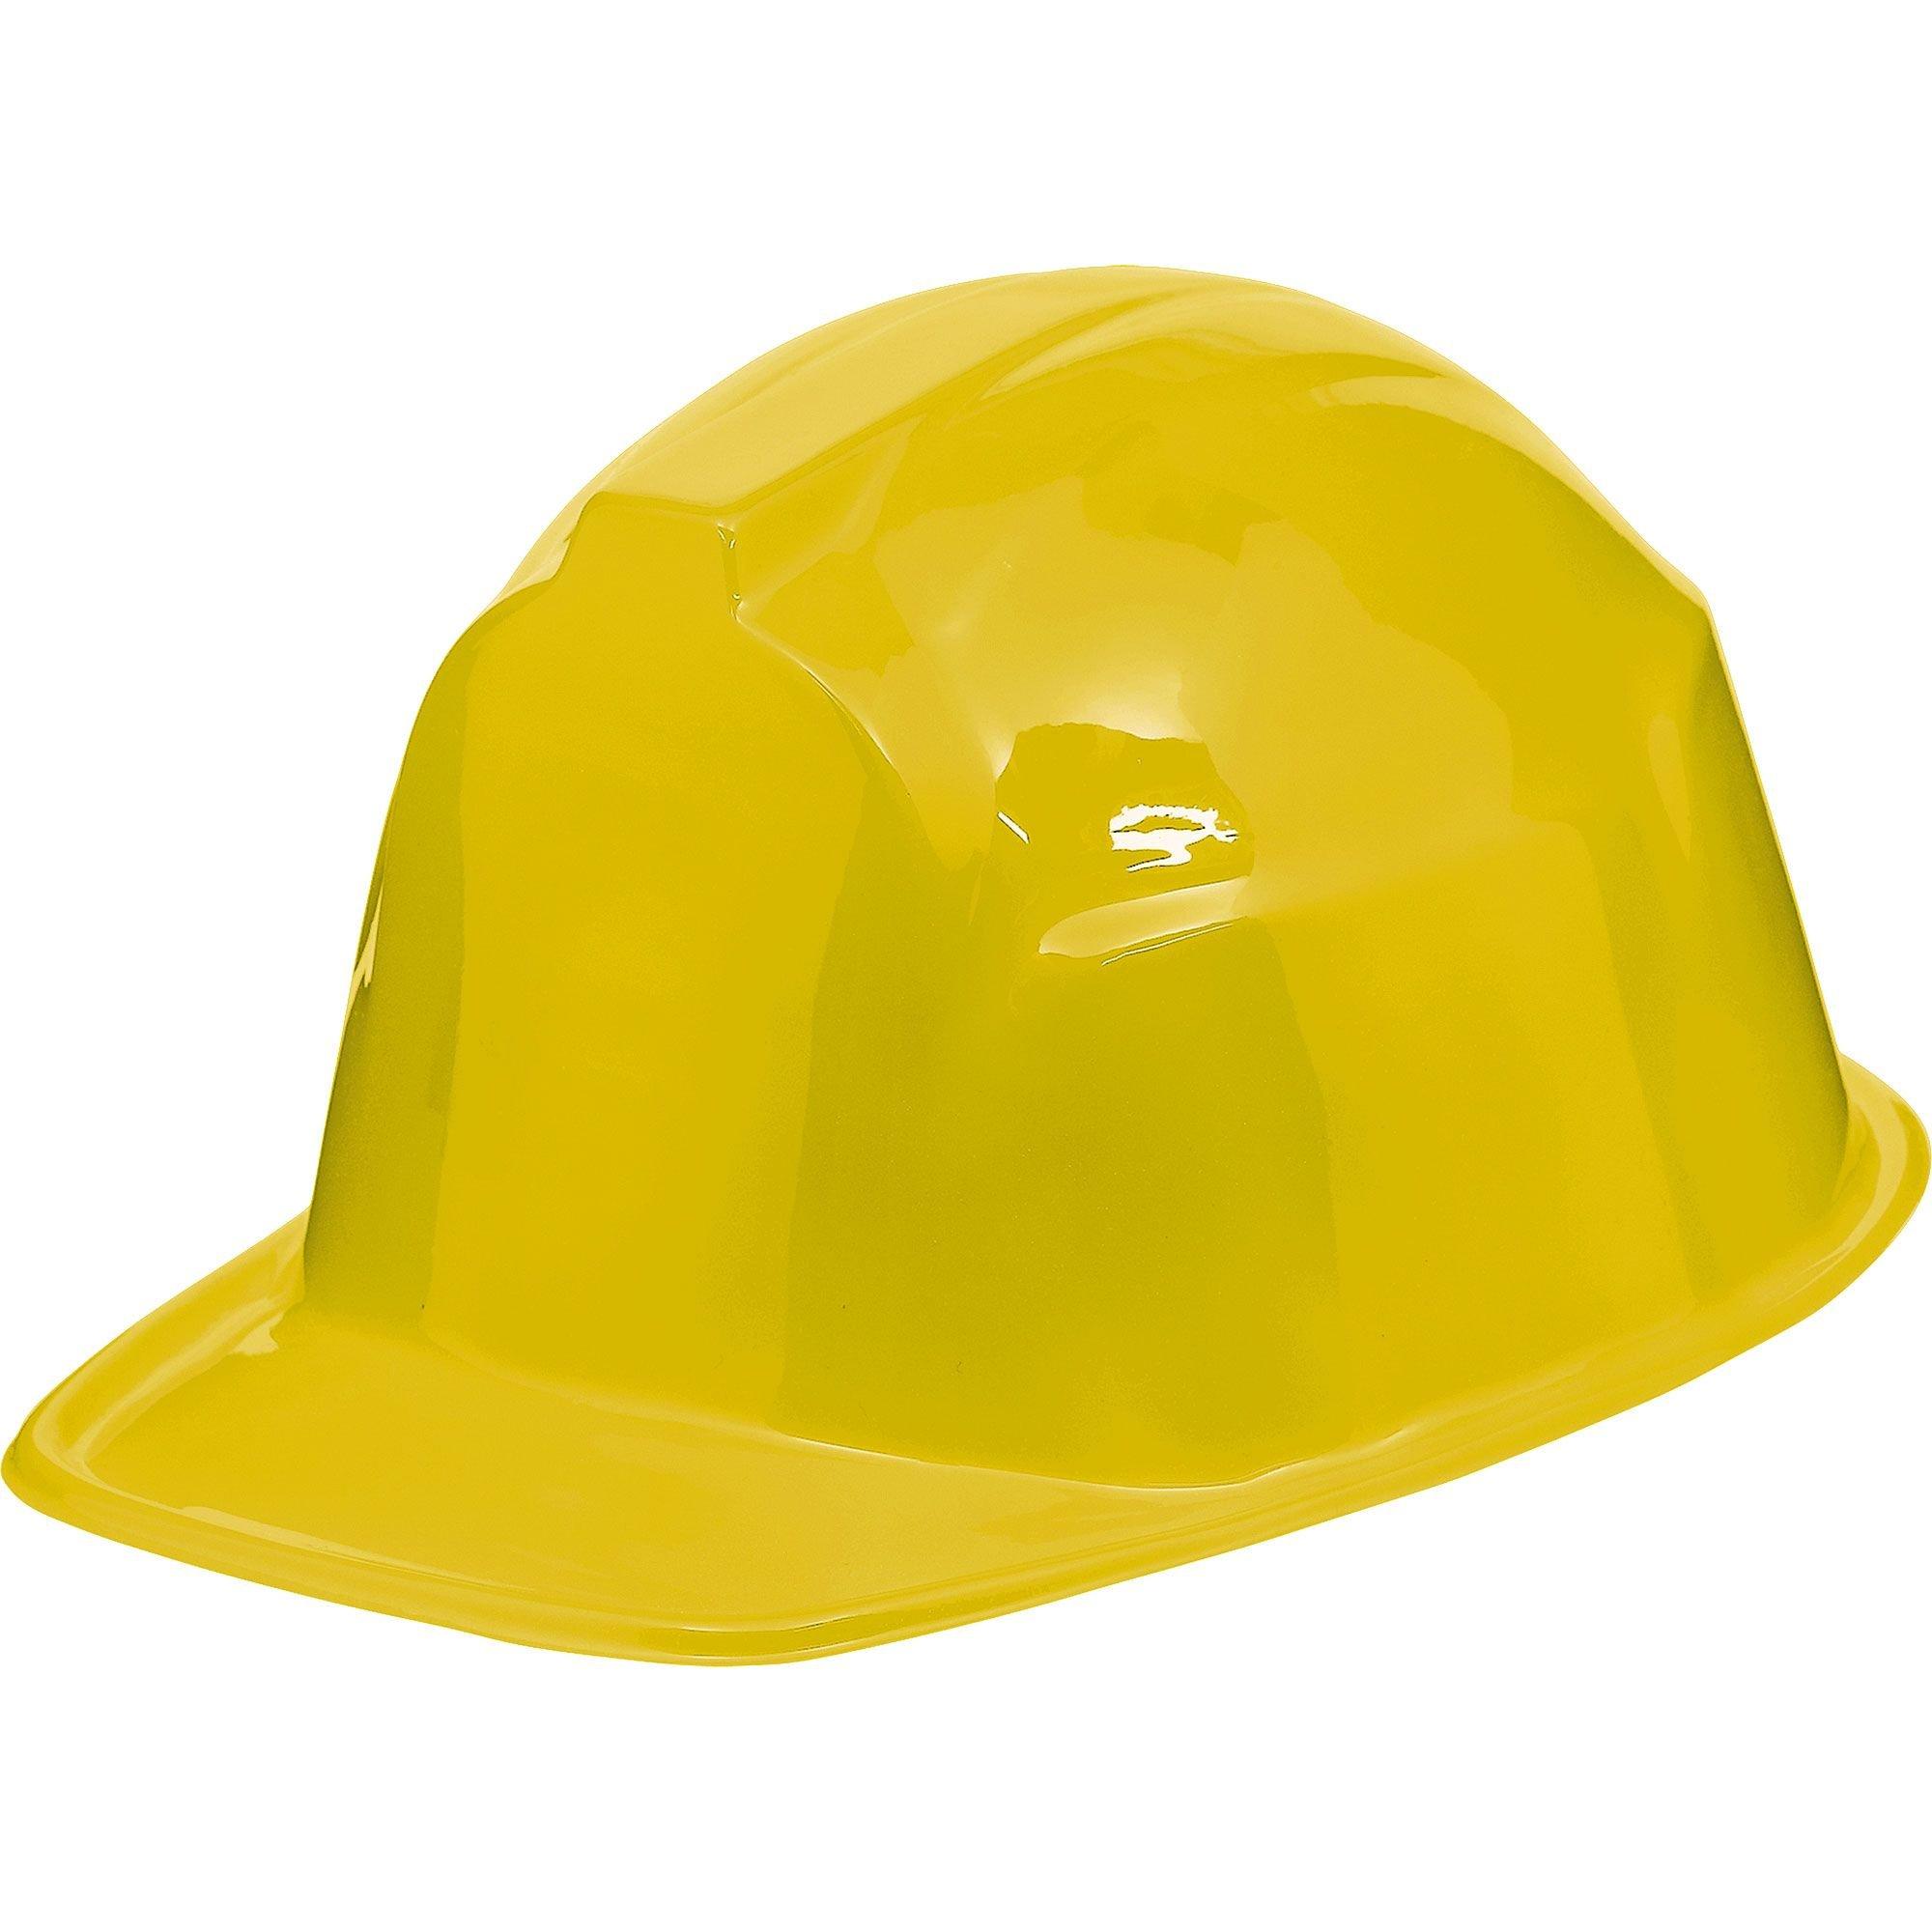 Yellow Construction Hat 8in x 5 1/2in